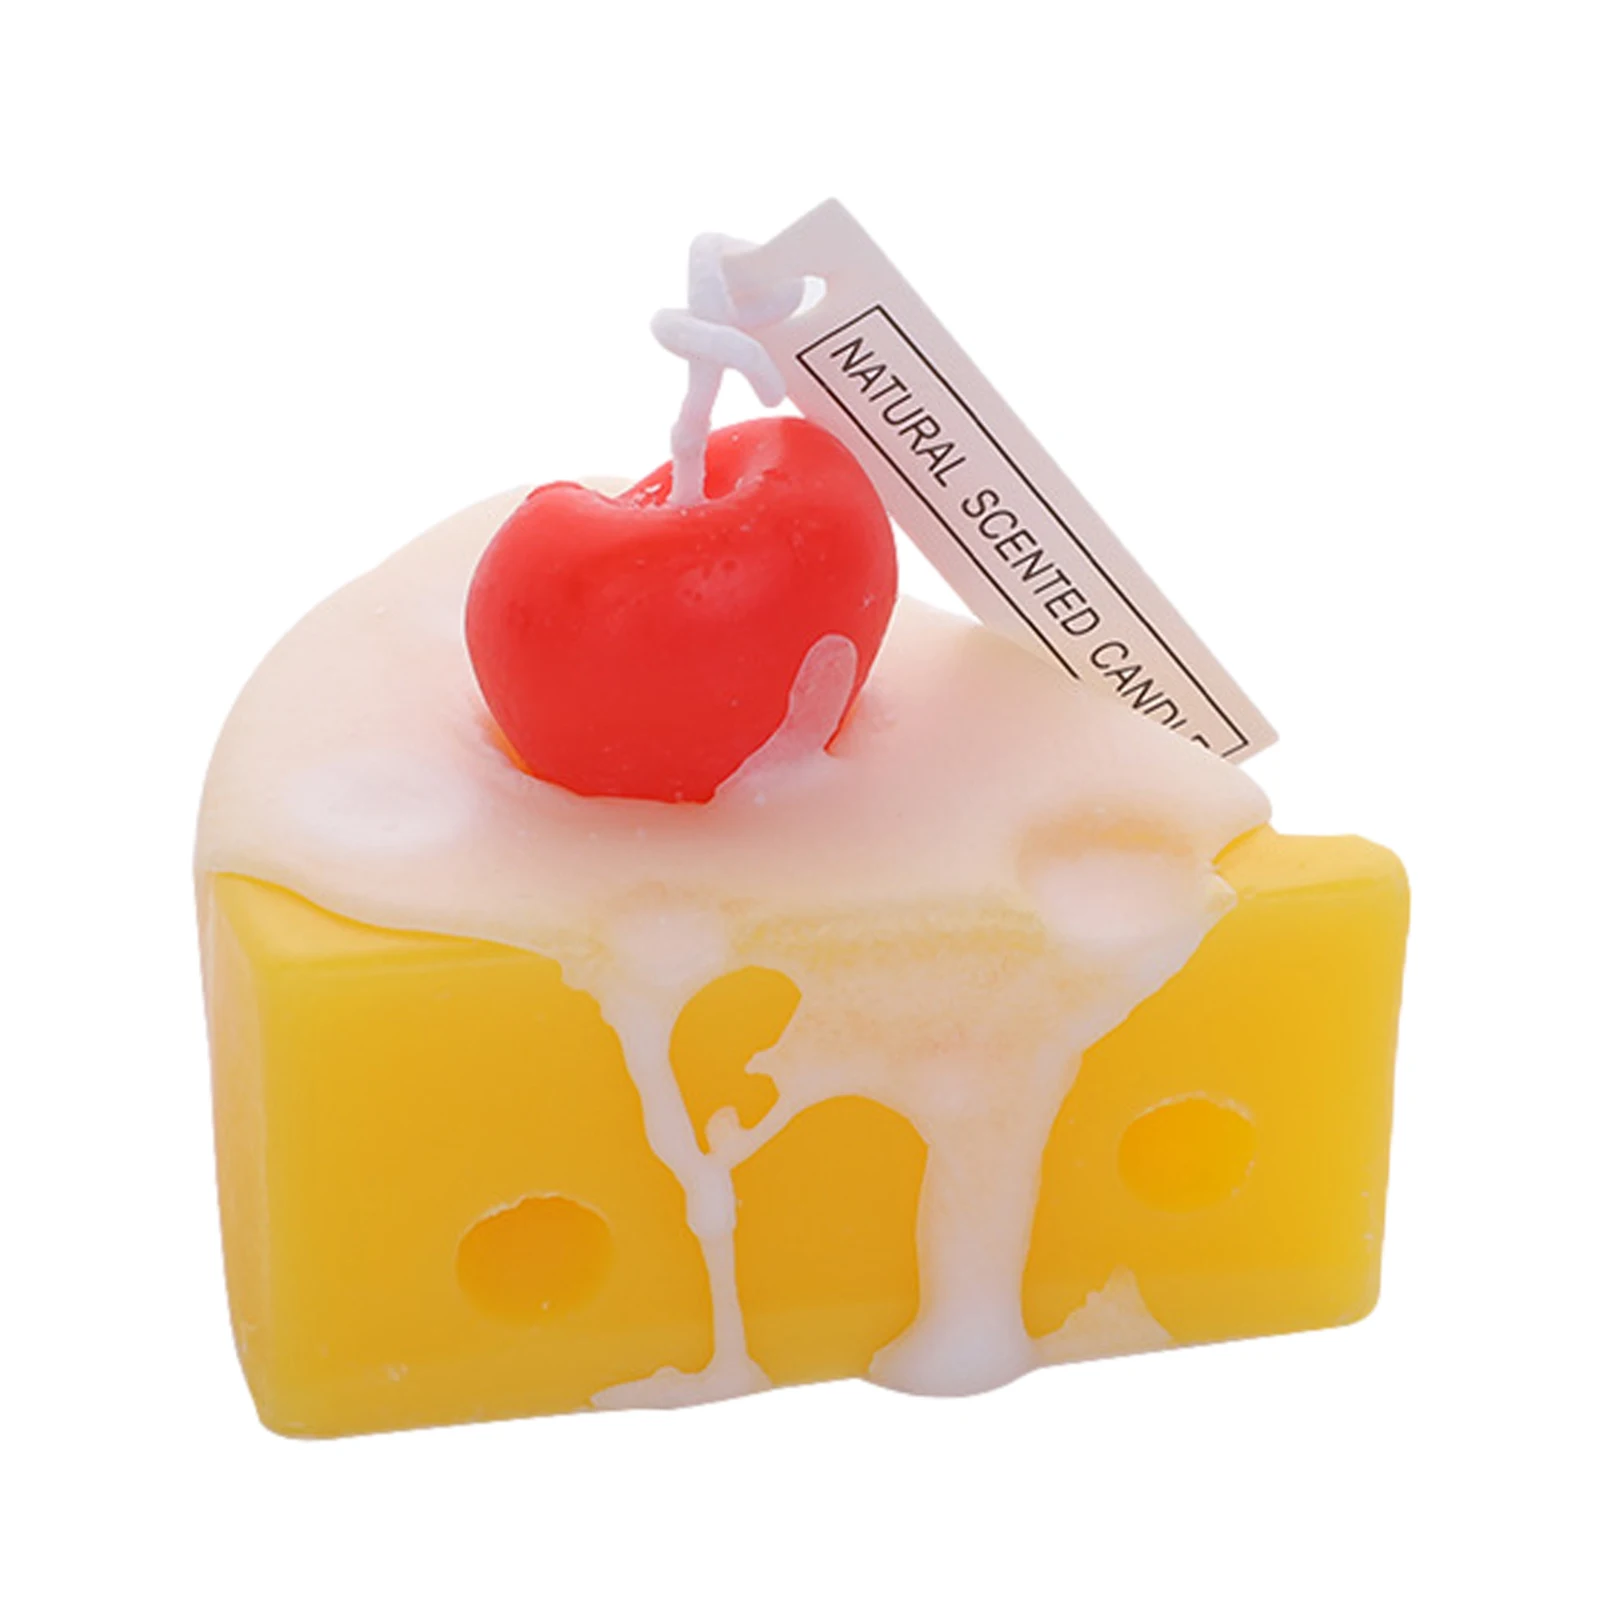 Cherry Cheese Shape Scented Candle Natural Soy Wax Cheese Cake Shaped Home Desktop Decoration Table Centerpiece